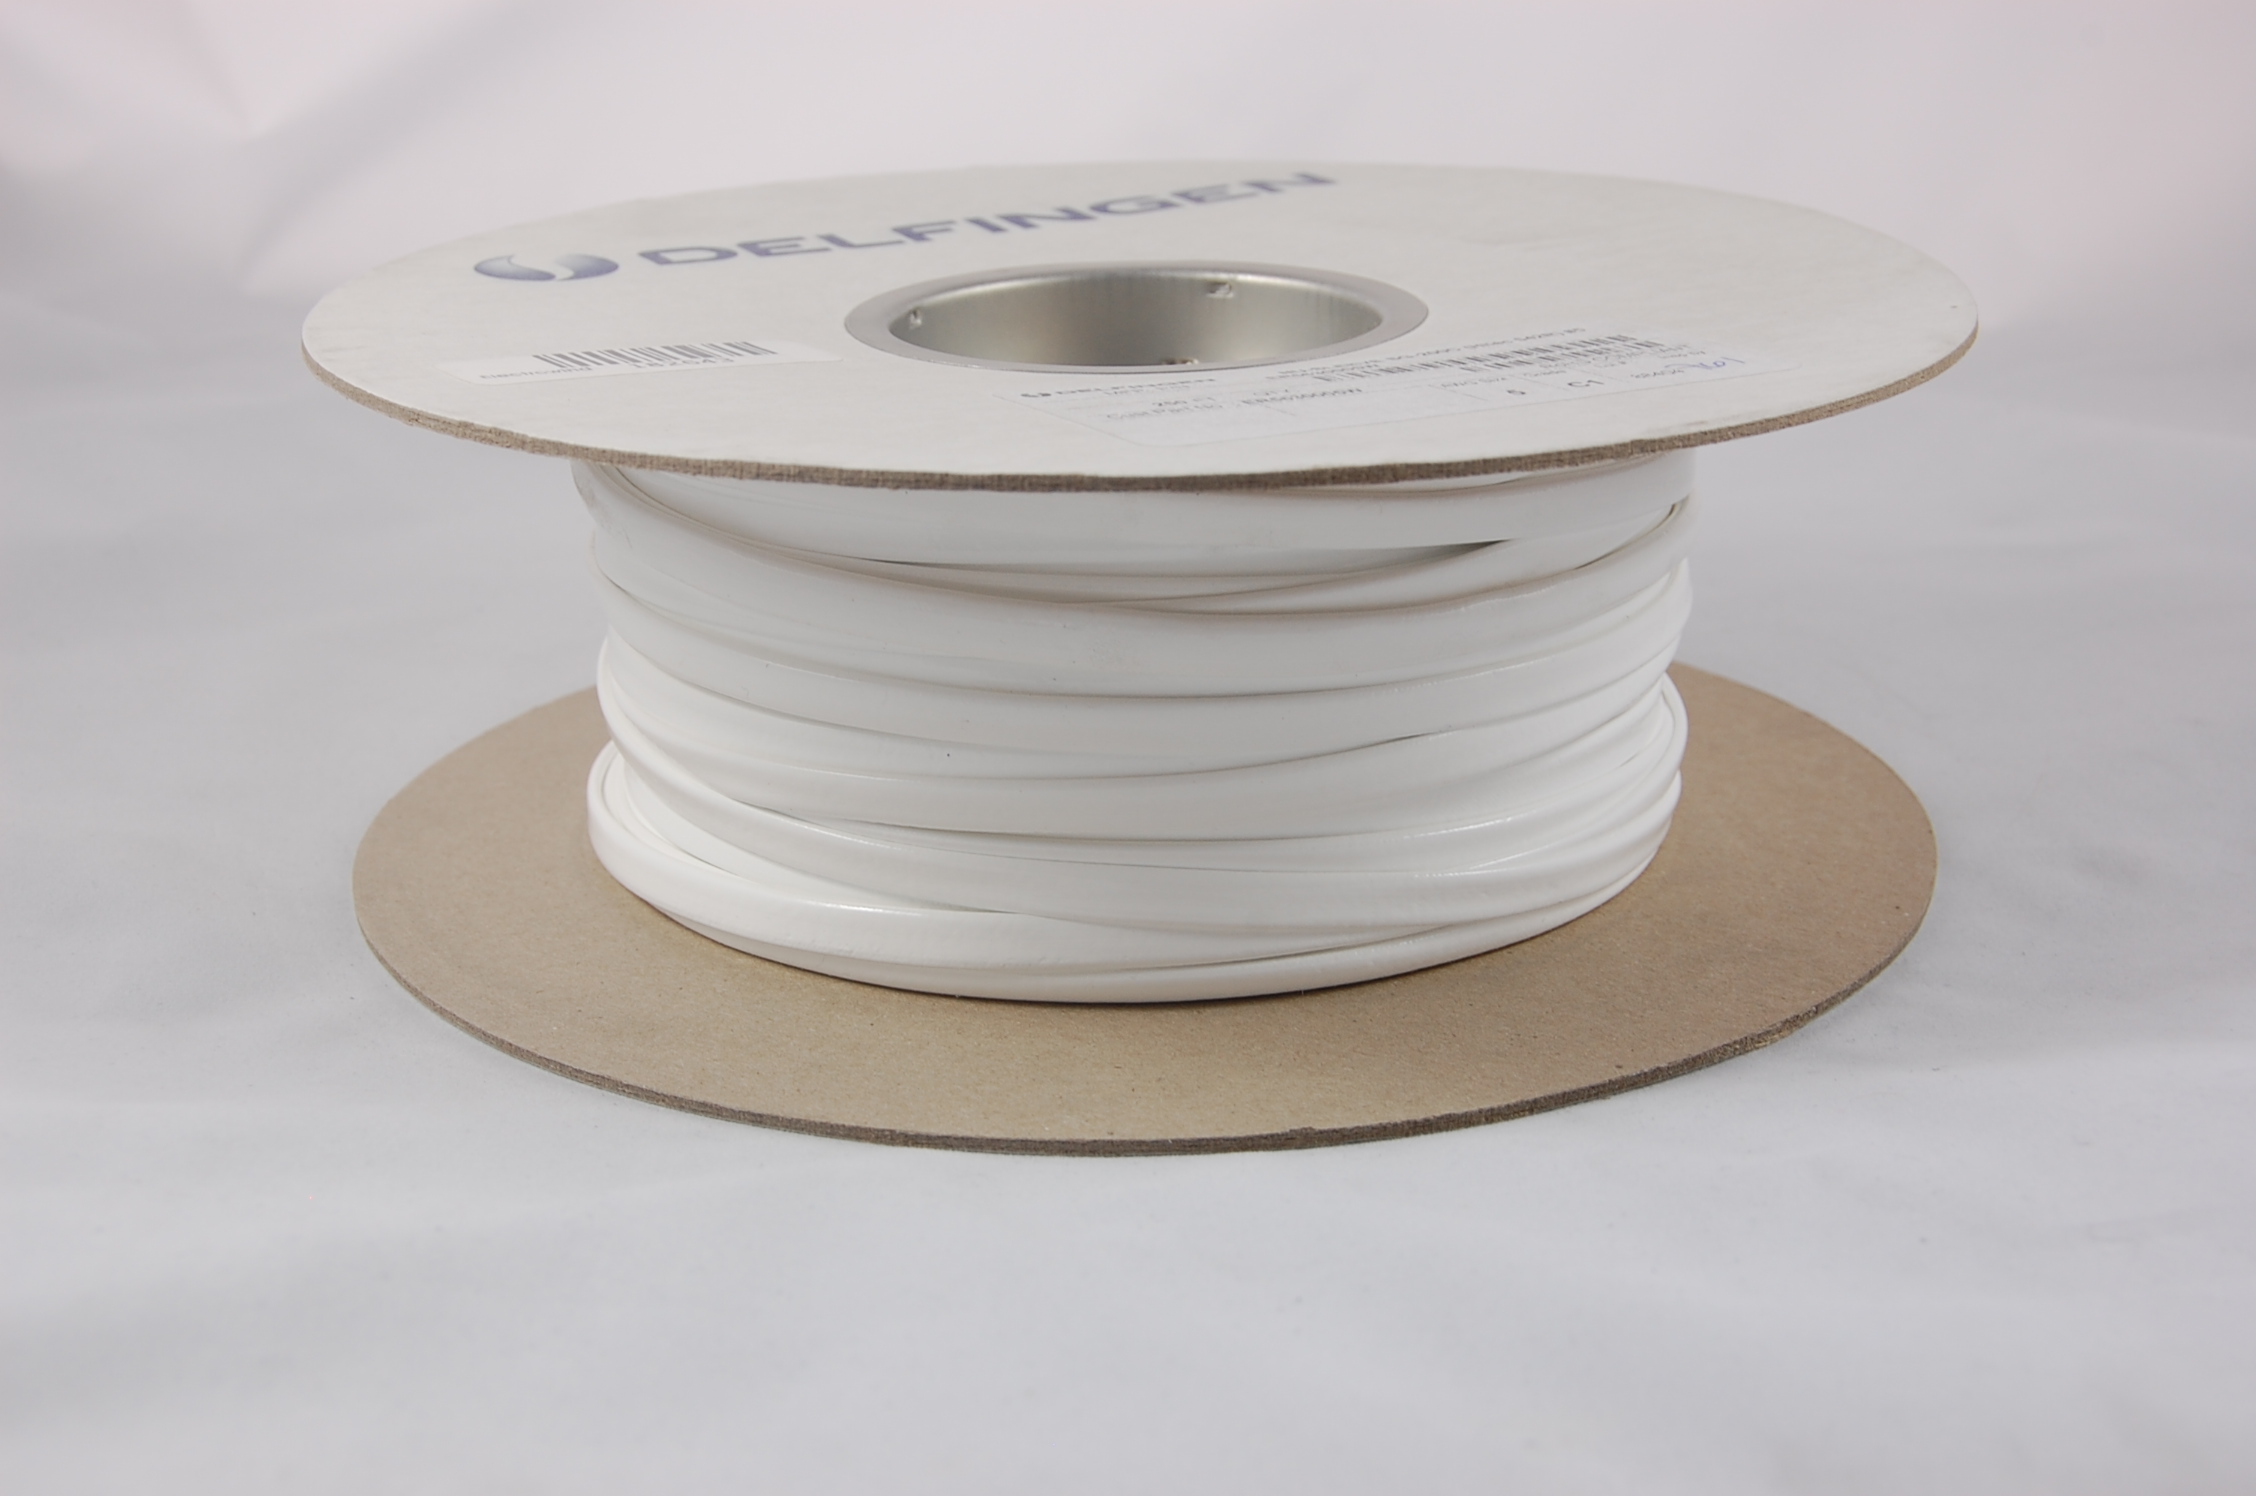 #0 AWG NU-SLEEVE SG-200 A (7000V) Silicone Rubber Coated Braided Fiberglass Sleeving (547F) 200°C, white, 100 FT per spool